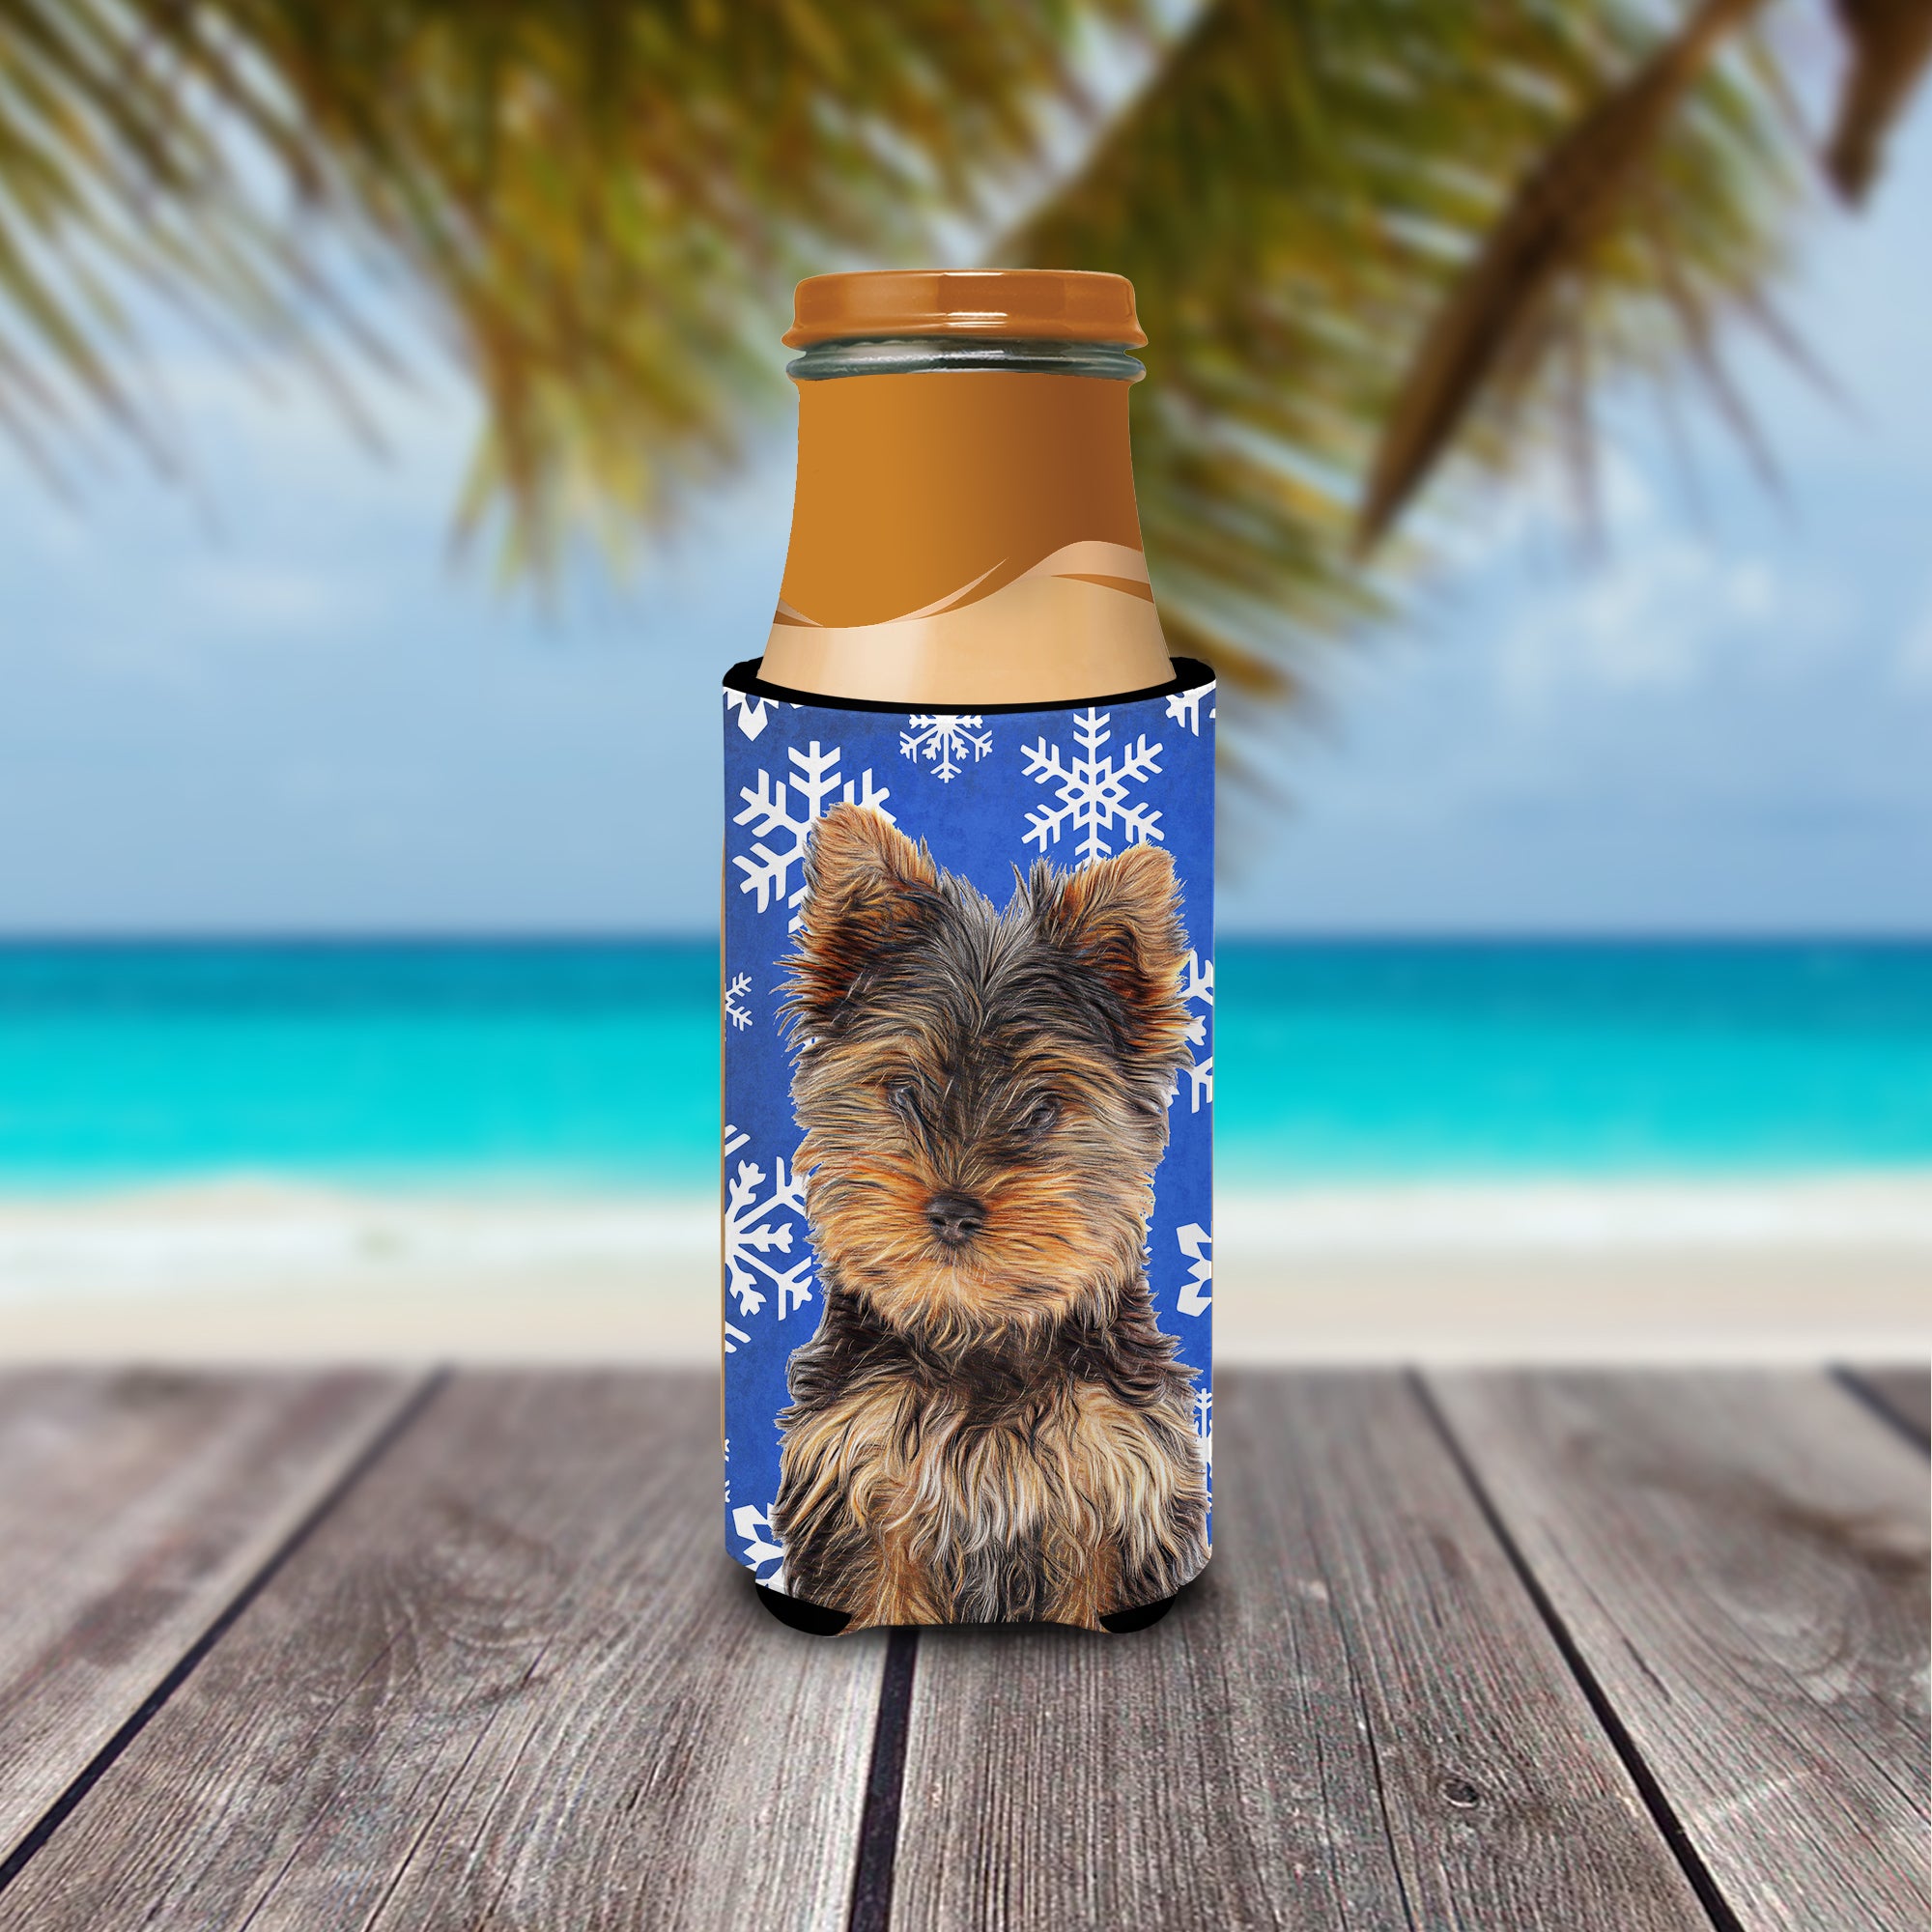 Winter Snowflakes Holiday Yorkie Puppy / Yorkshire Terrier Ultra Beverage Insulators for slim cans KJ1181MUK.